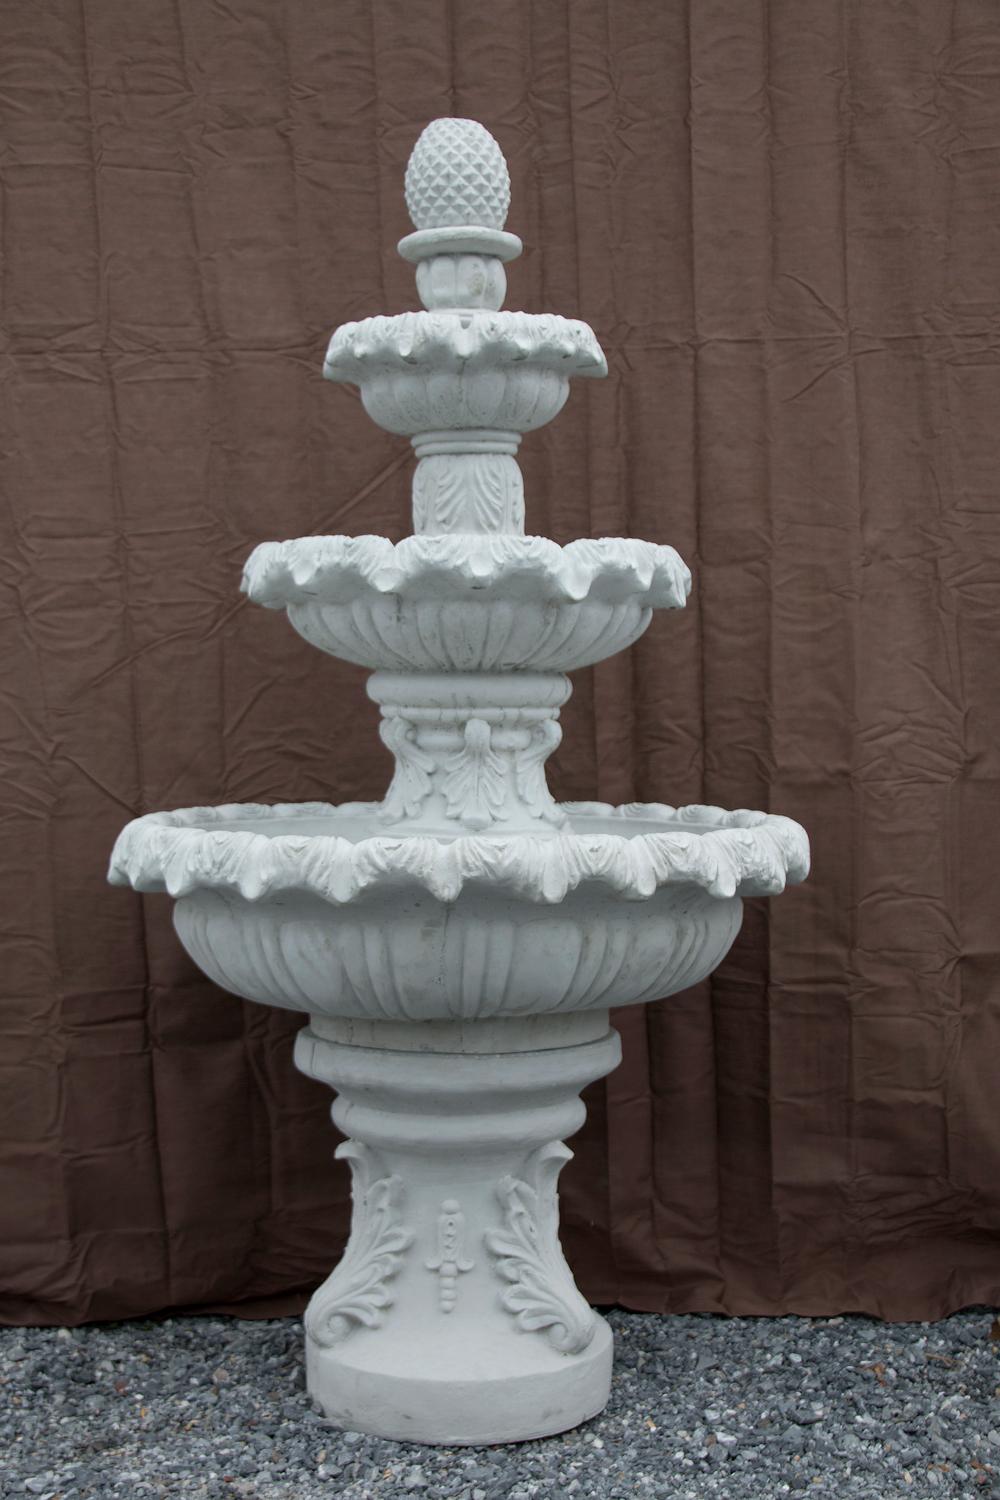 New Orleans Fountain - 29" by 52" high